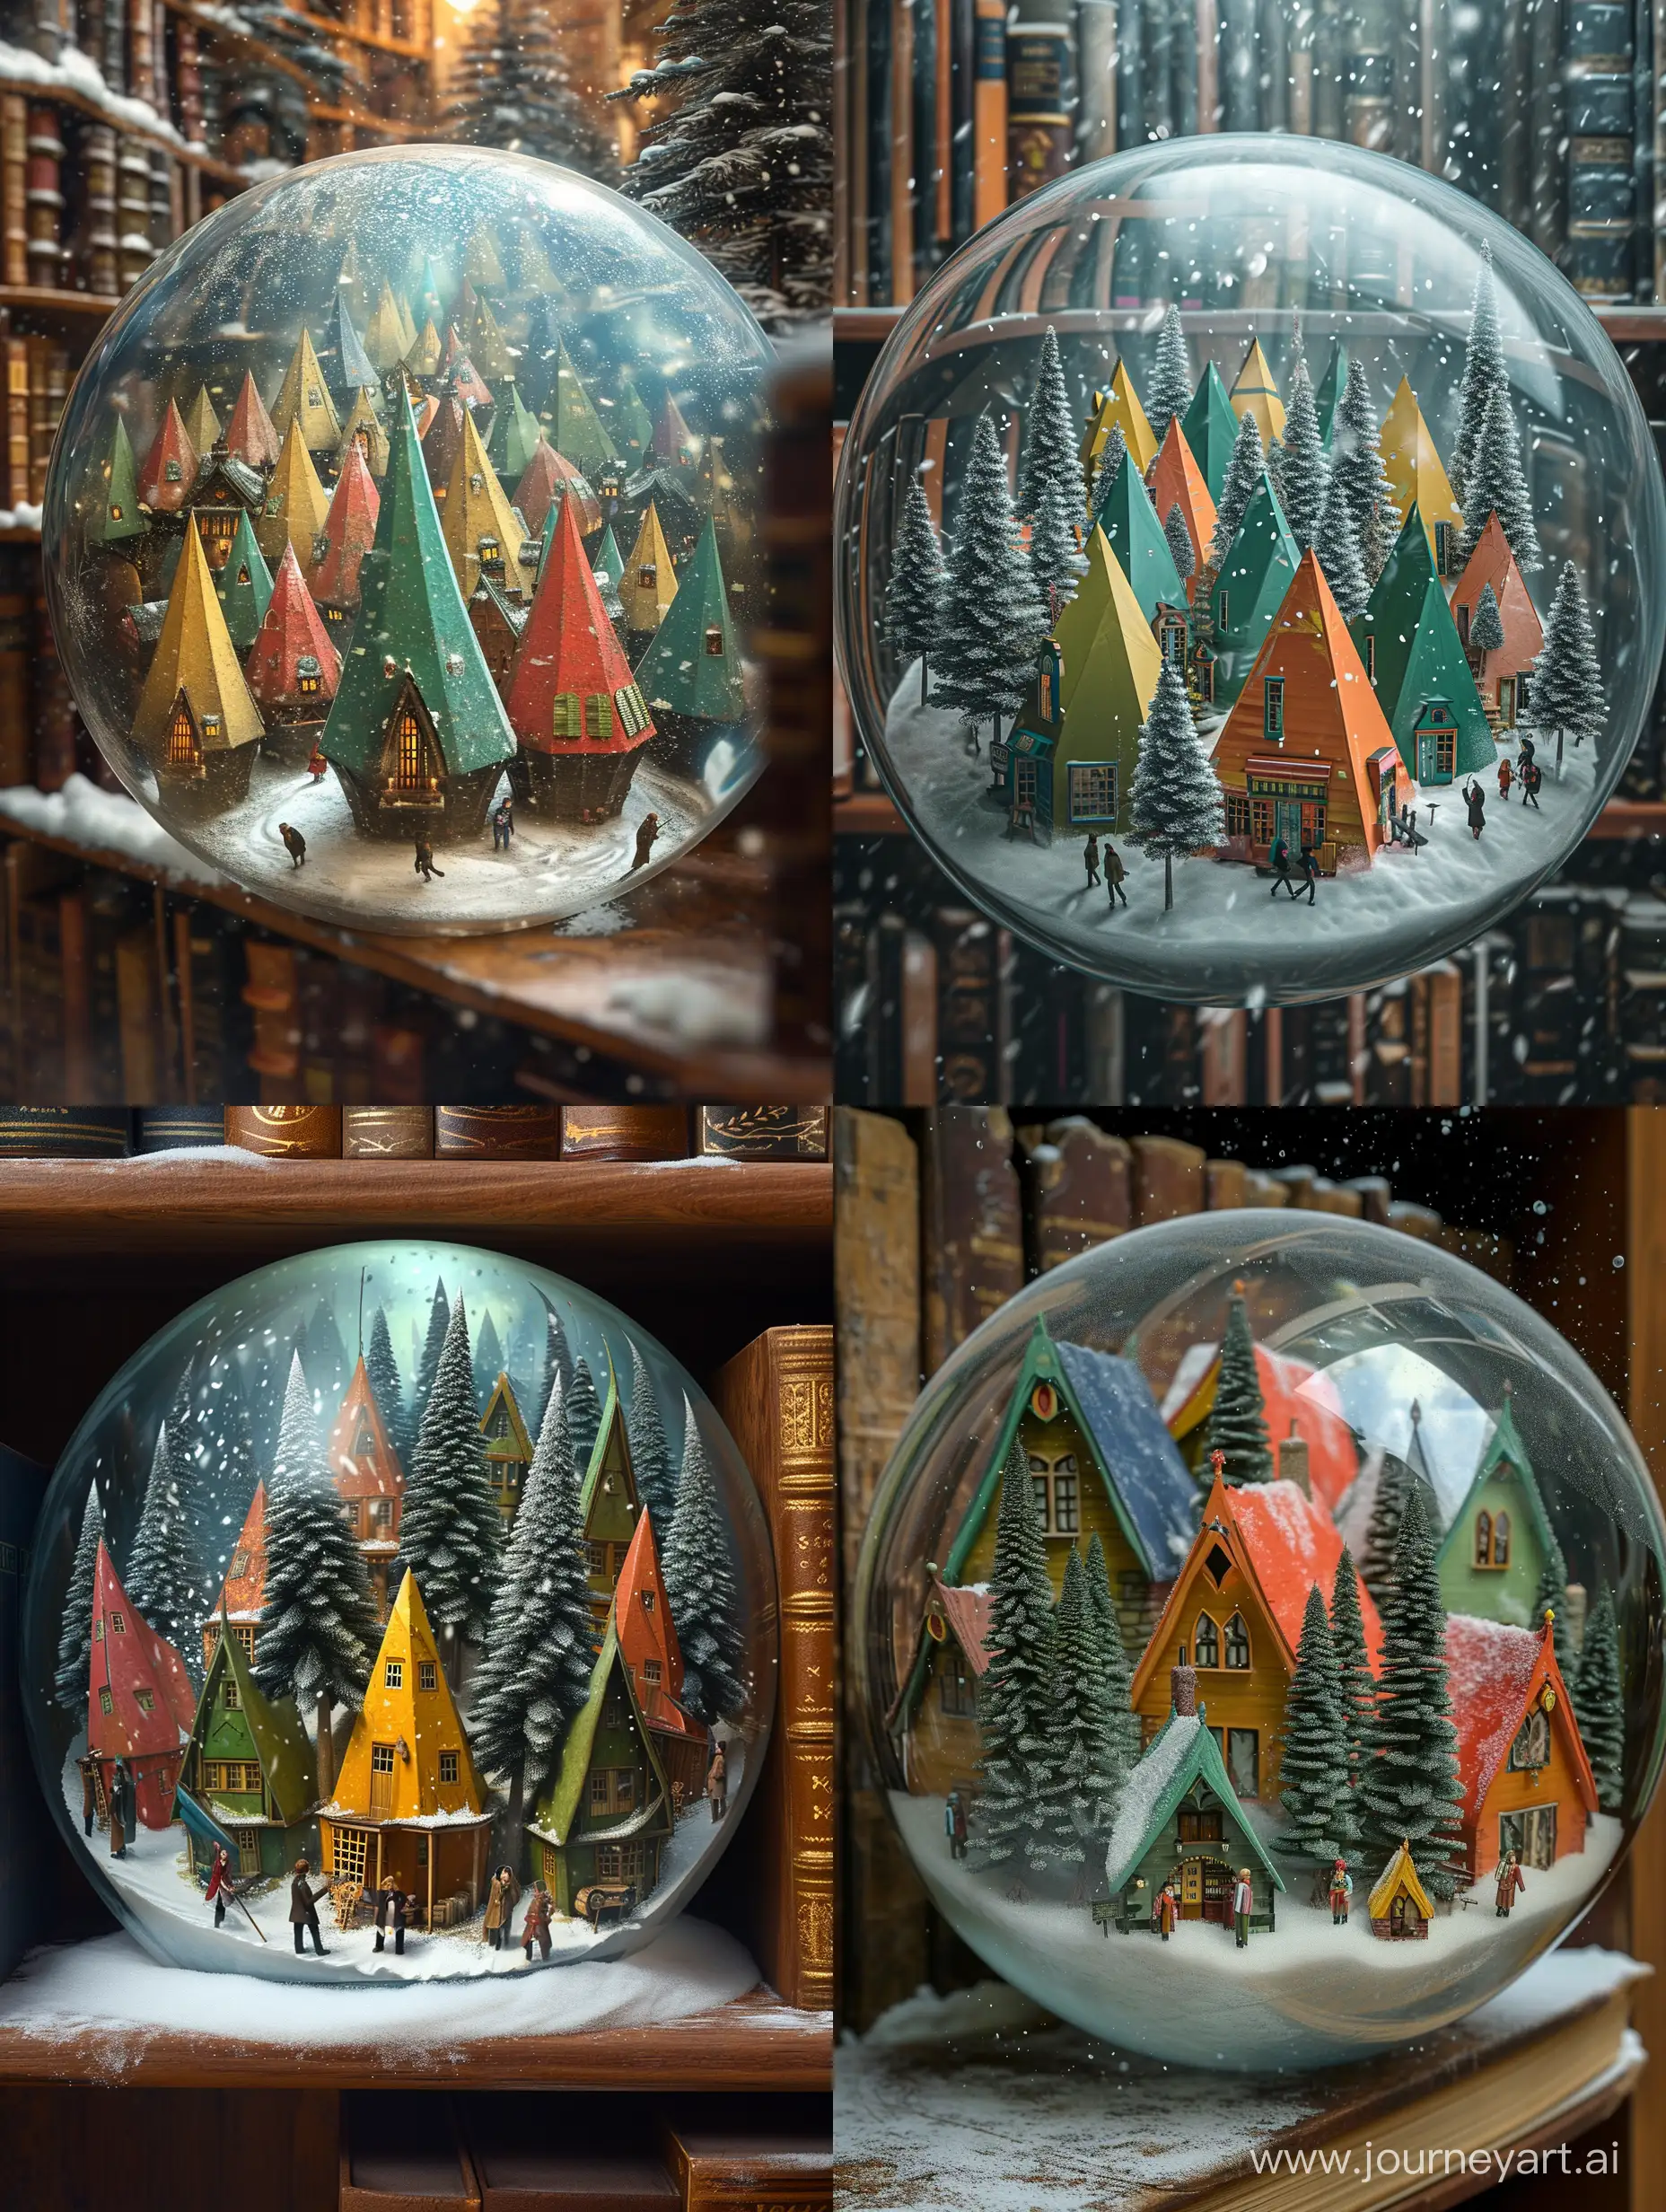 village with many colorful triangular houses in a glass sphere,
living people,magical, in winter, snowing,inside a library shelf, between books,extremely detailed,ultra detail,natural light,harry potter,hobbit.